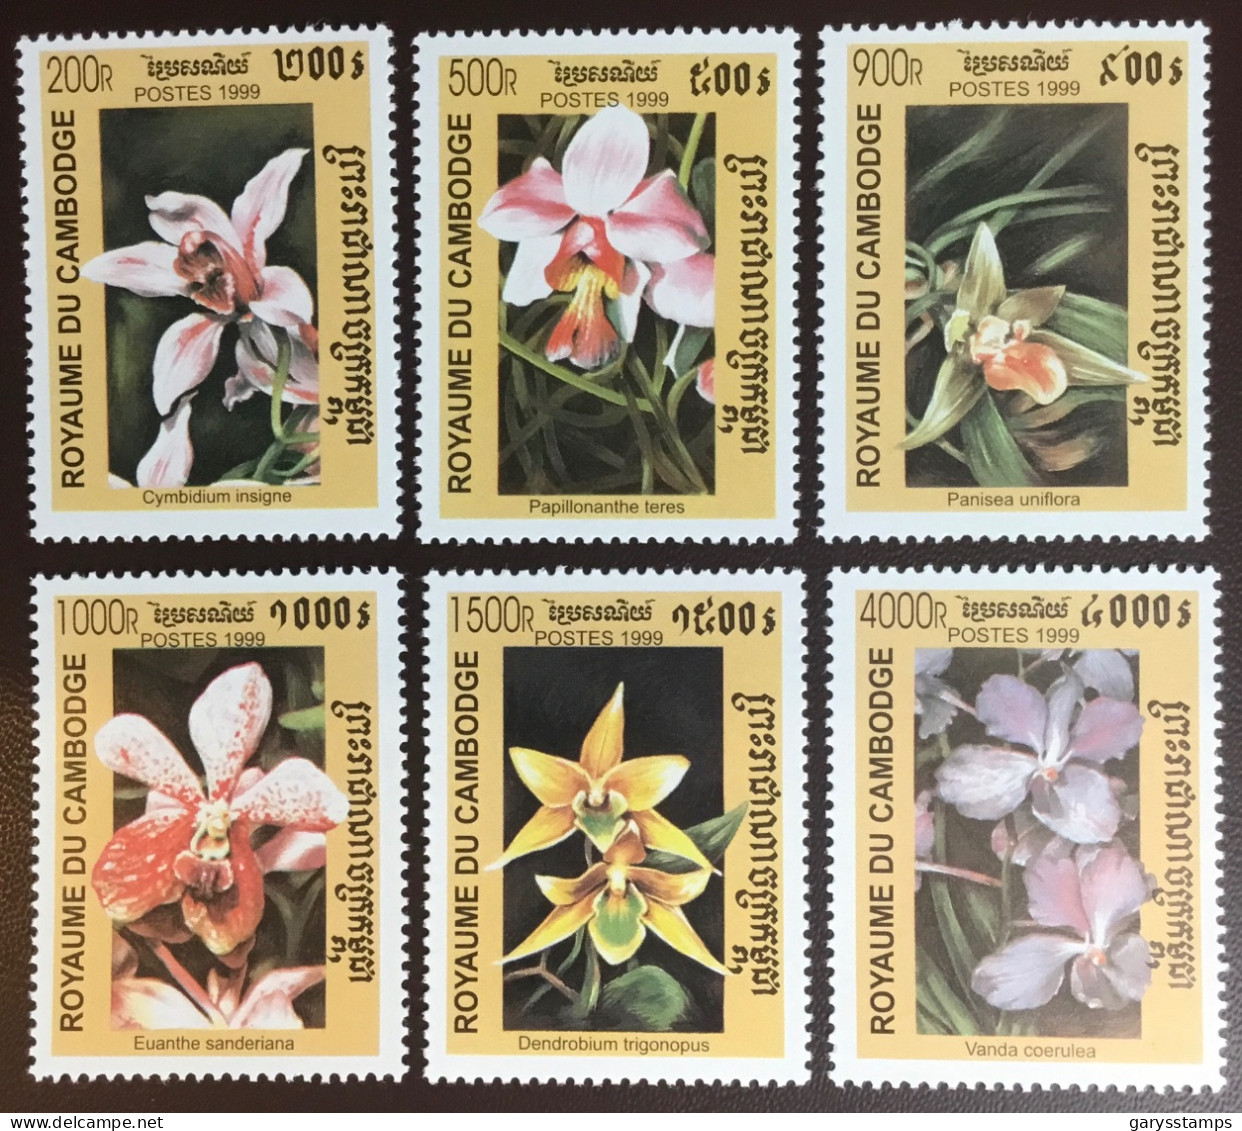 Cambodia 1999 Orchids Flowers MNH - Orchidee